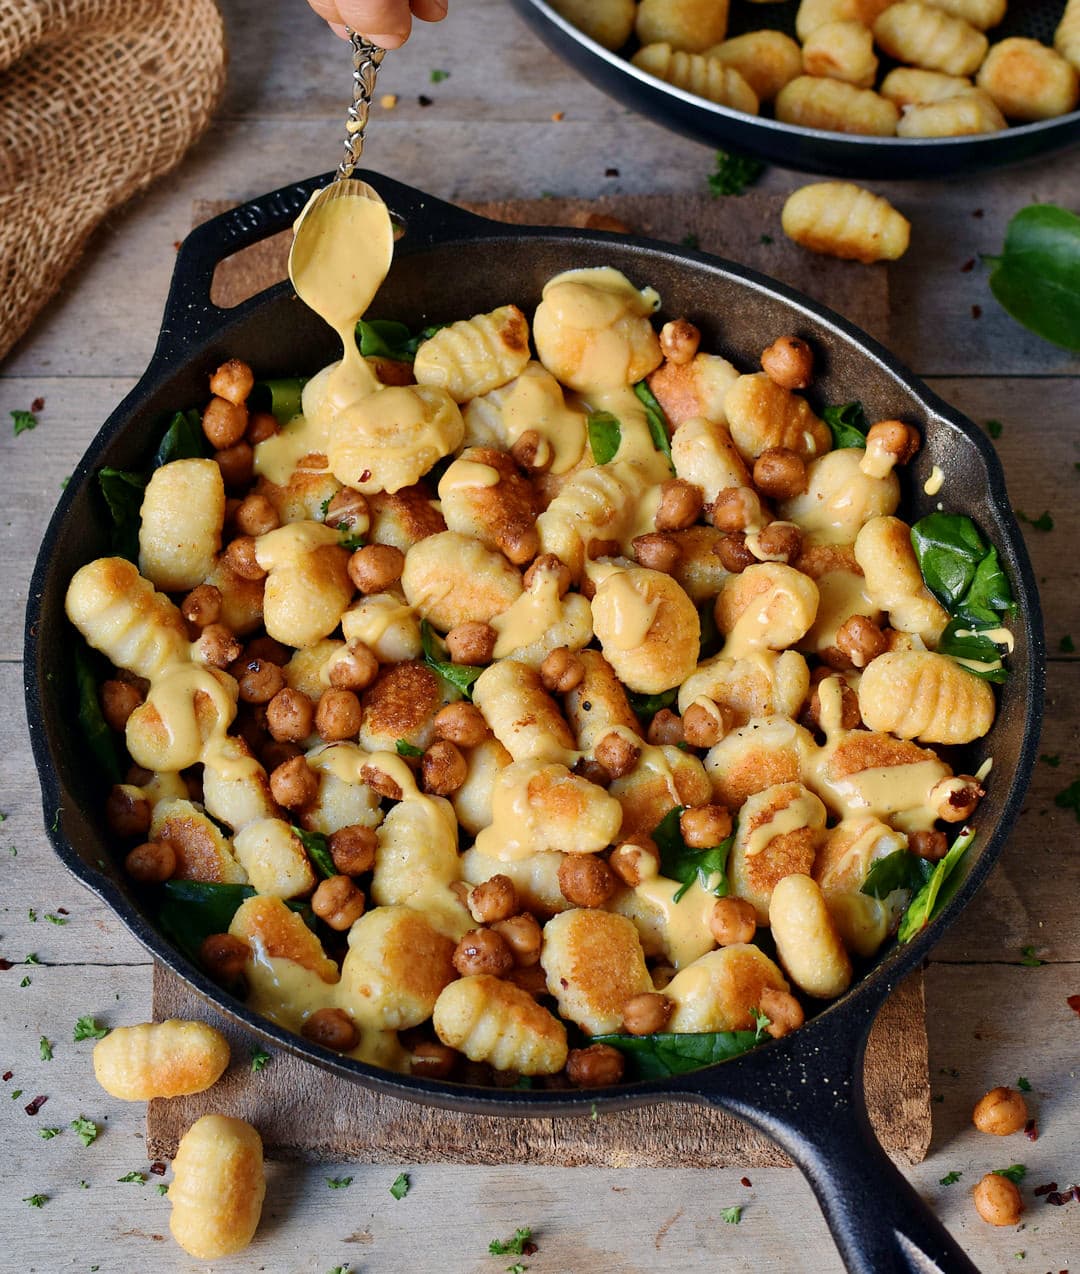 Homemade gluten-free gnocchi with roasted chickpeas spinach and vegan cheese sauce in a black skillet